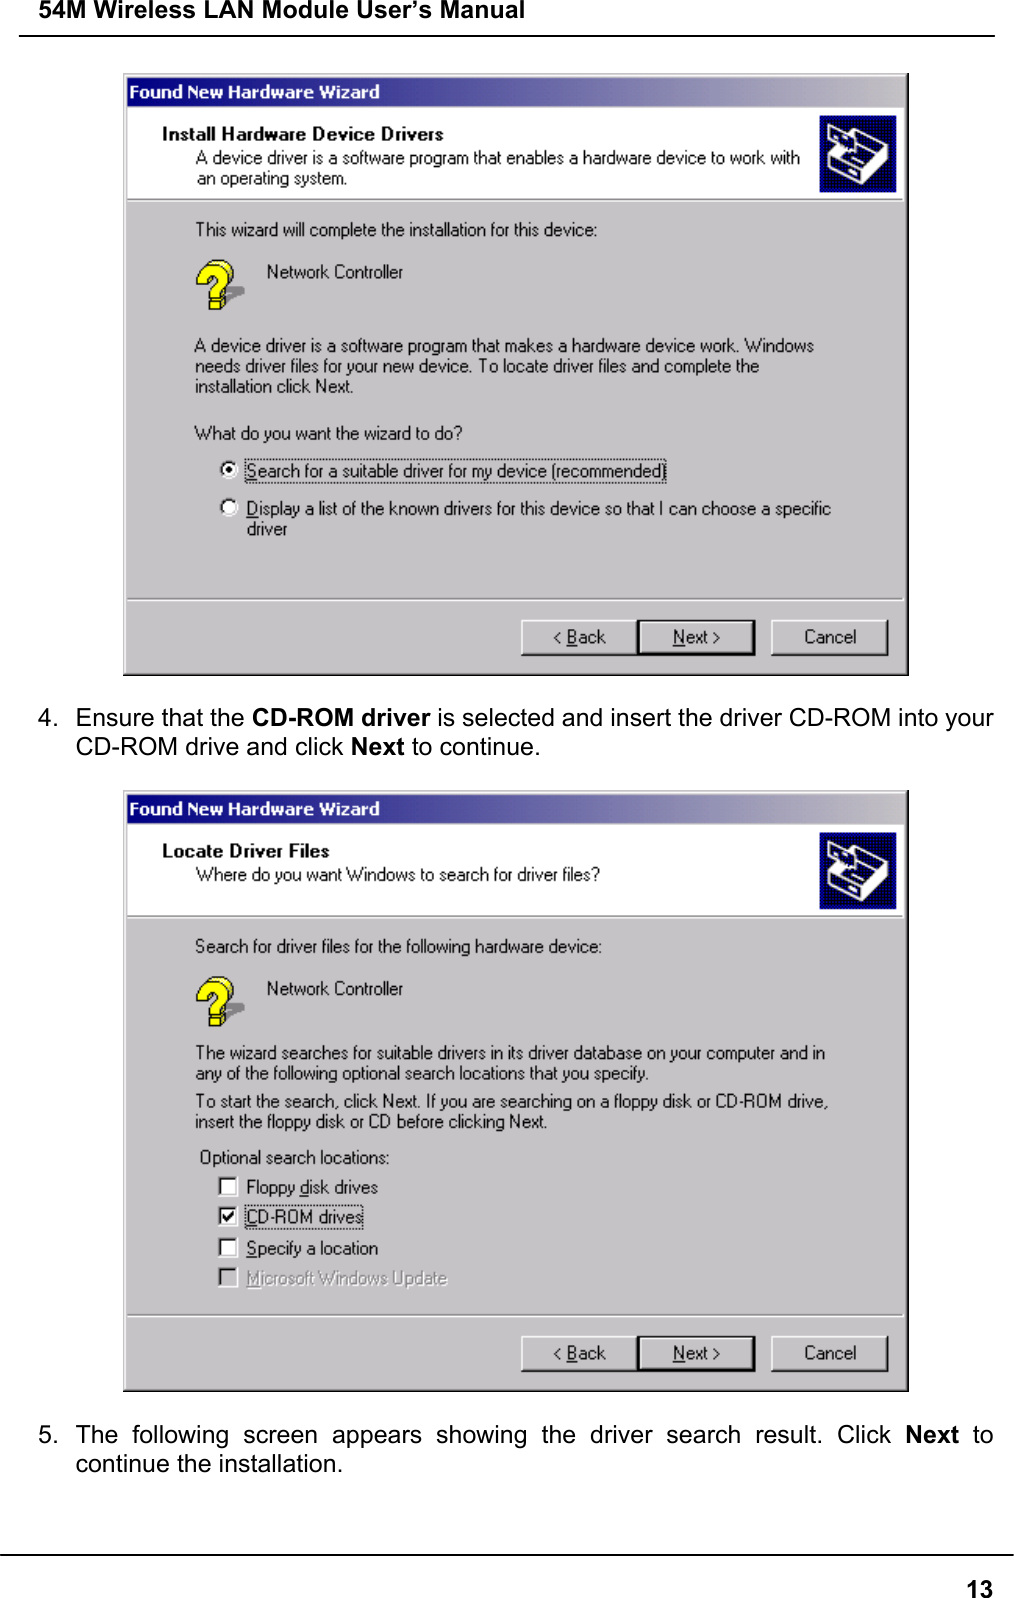 54M Wireless LAN Module User’s Manual134.  Ensure that the CD-ROM driver is selected and insert the driver CD-ROM into yourCD-ROM drive and click Next to continue.5. The following screen appears showing the driver search result. Click Next  tocontinue the installation.